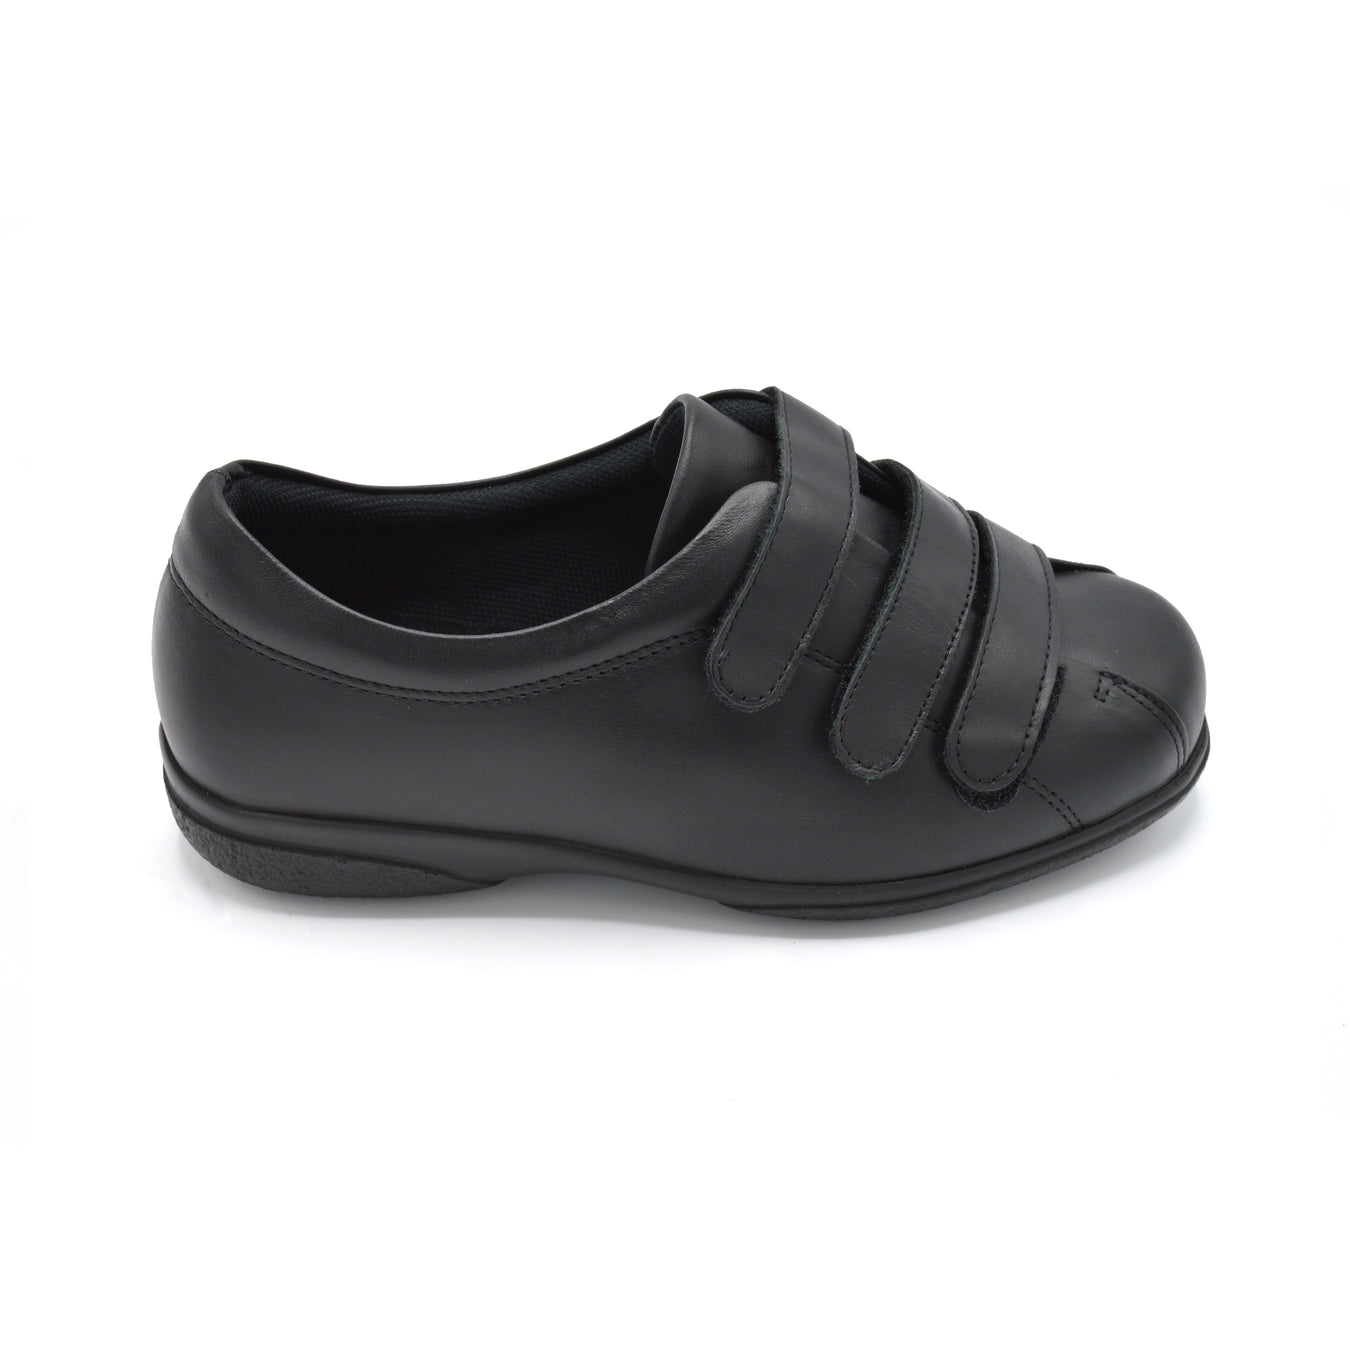 Ladies Wide Fitting Velcro Close Shoes